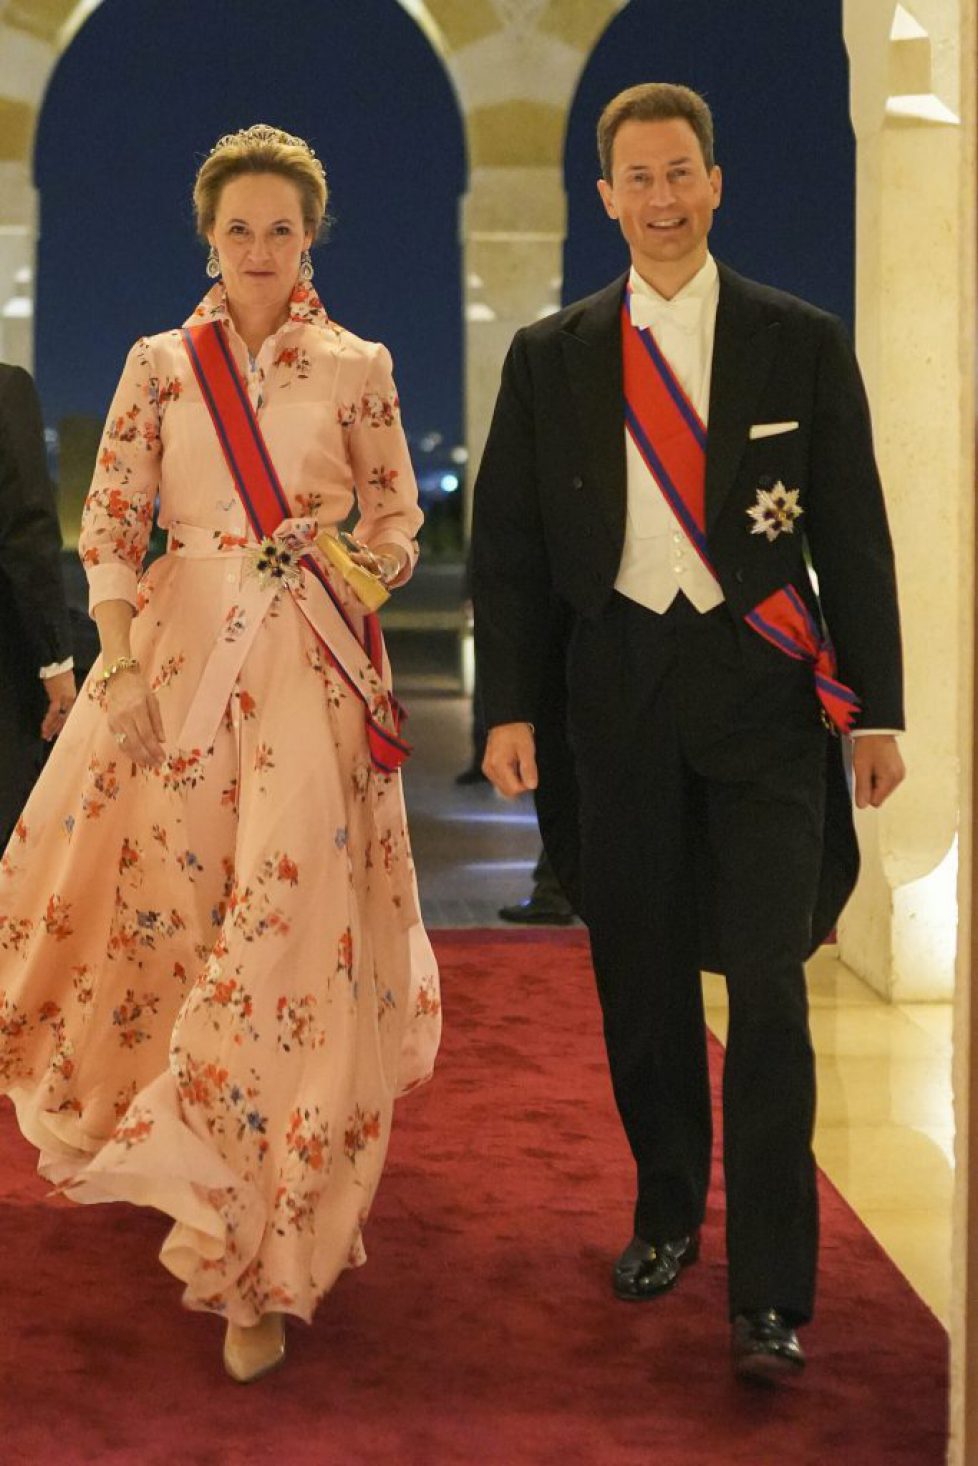 Wedding of Crown Prince Al Hussein bin Abdullah II and Miss Rajwa Alseif Photo: Royal Hashemite Court / Albert Nieboer / Netherlands OUT / Point de Vue OUT